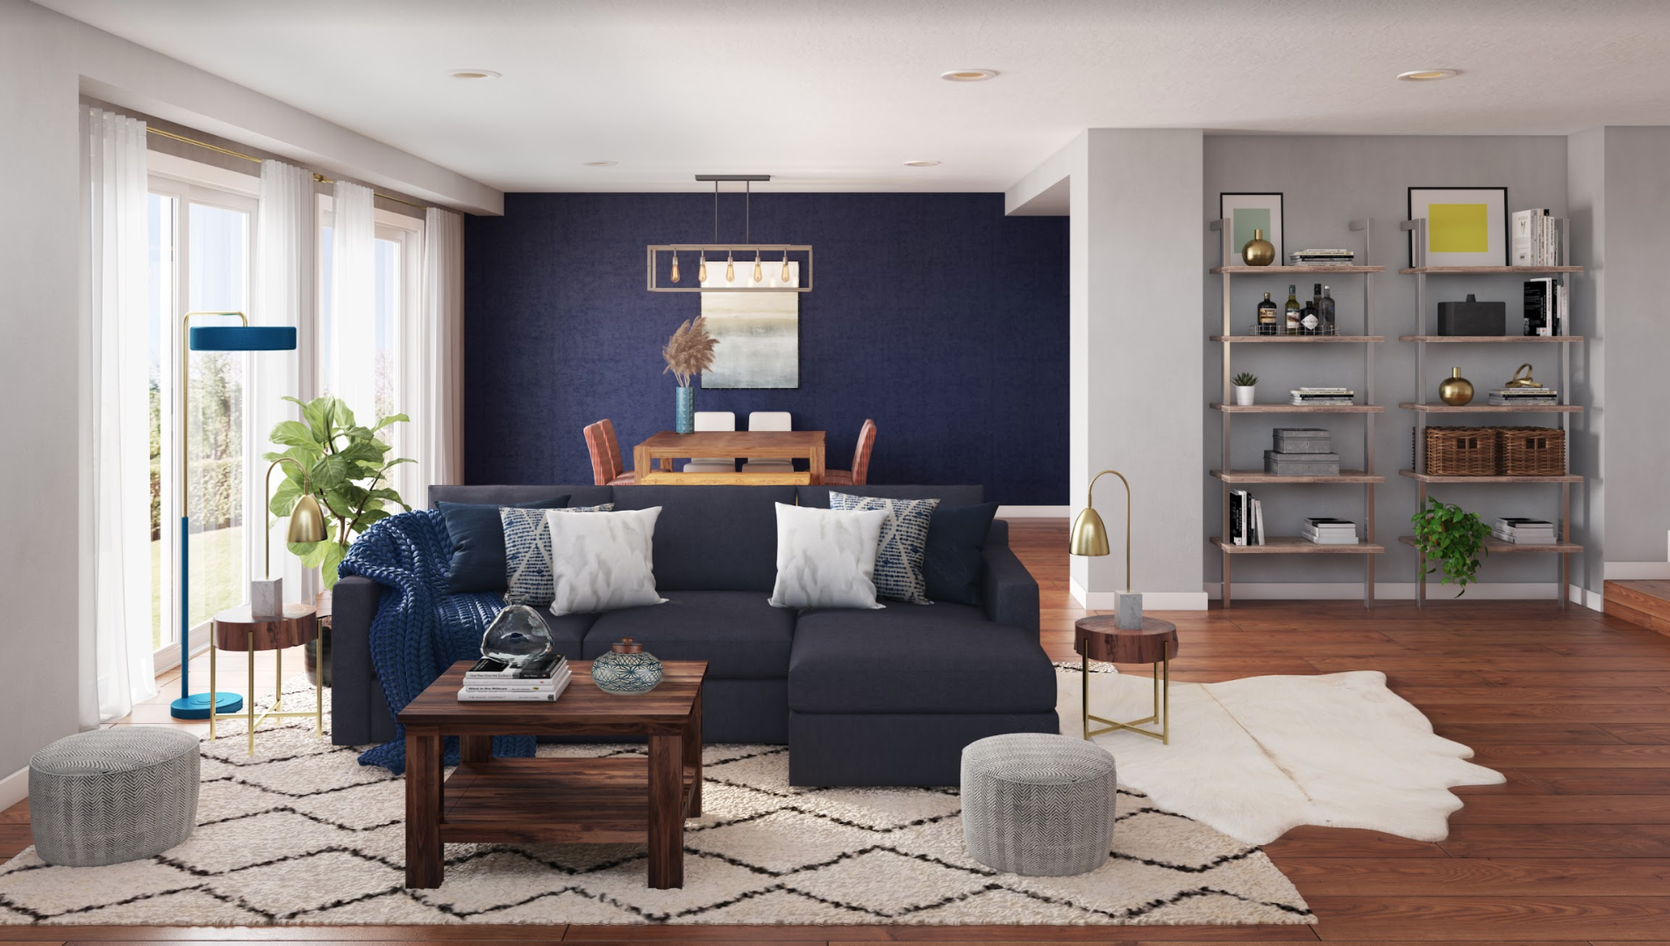 3 Professional Tips for Selecting Living Room Paint Colors - Marietta